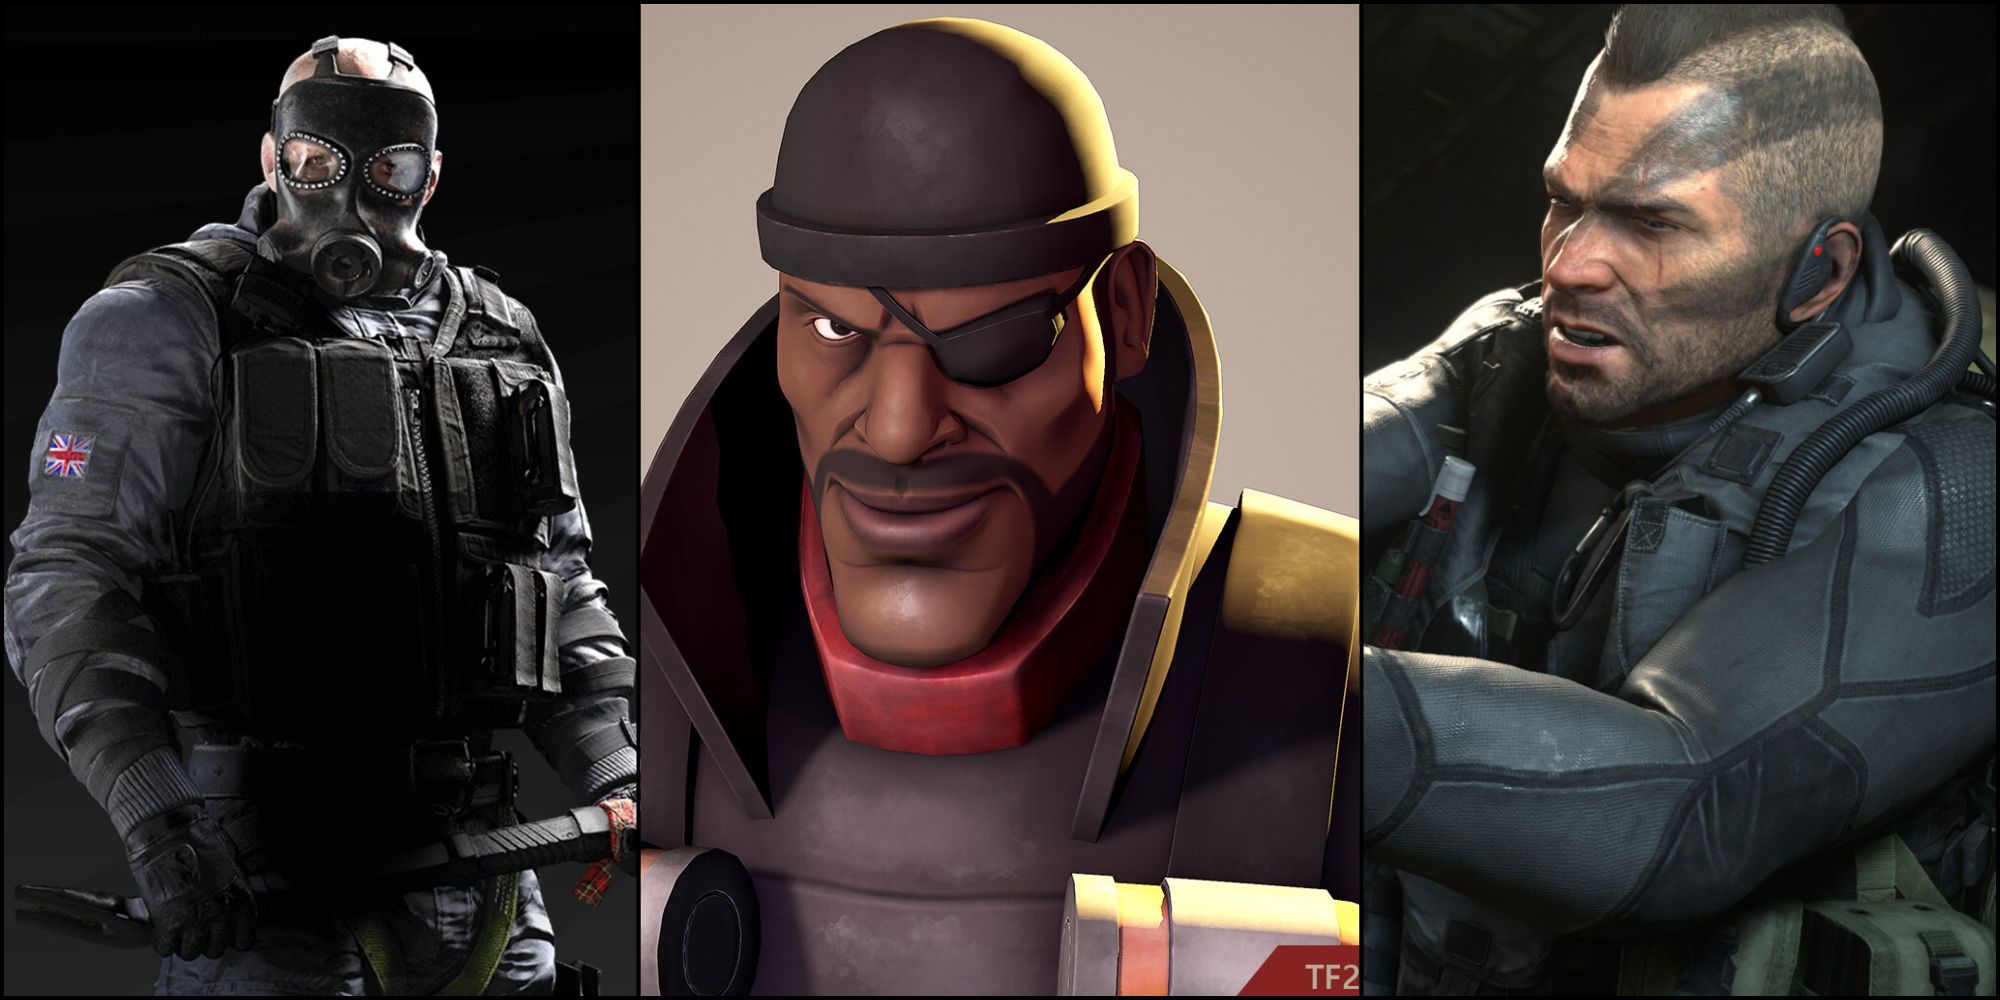 Sledge, Demoman, and Soap in a split collage